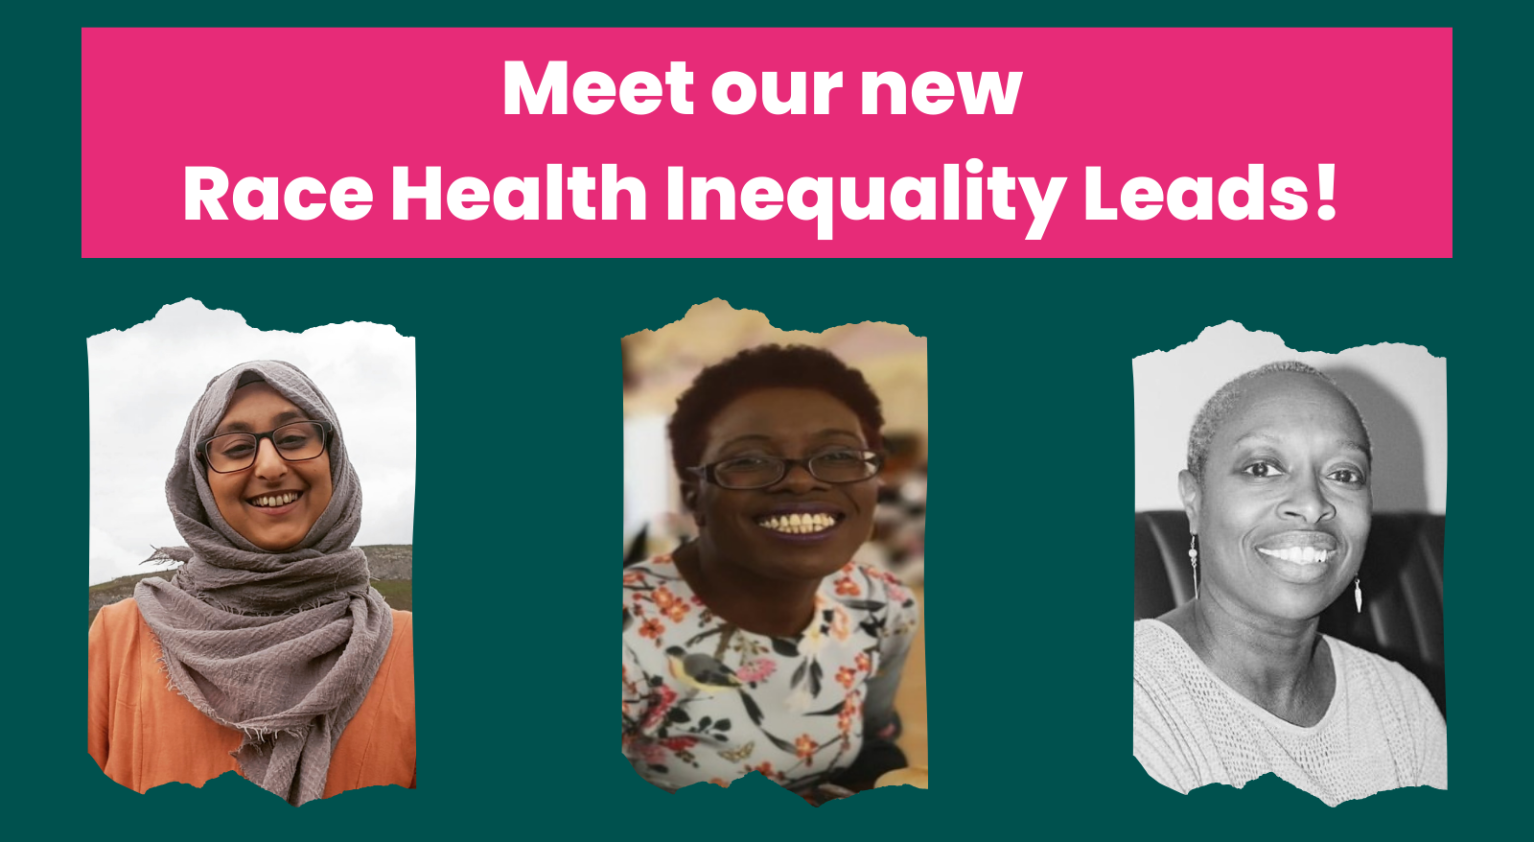 Text says "Meet the Race Health Inequality Leads"